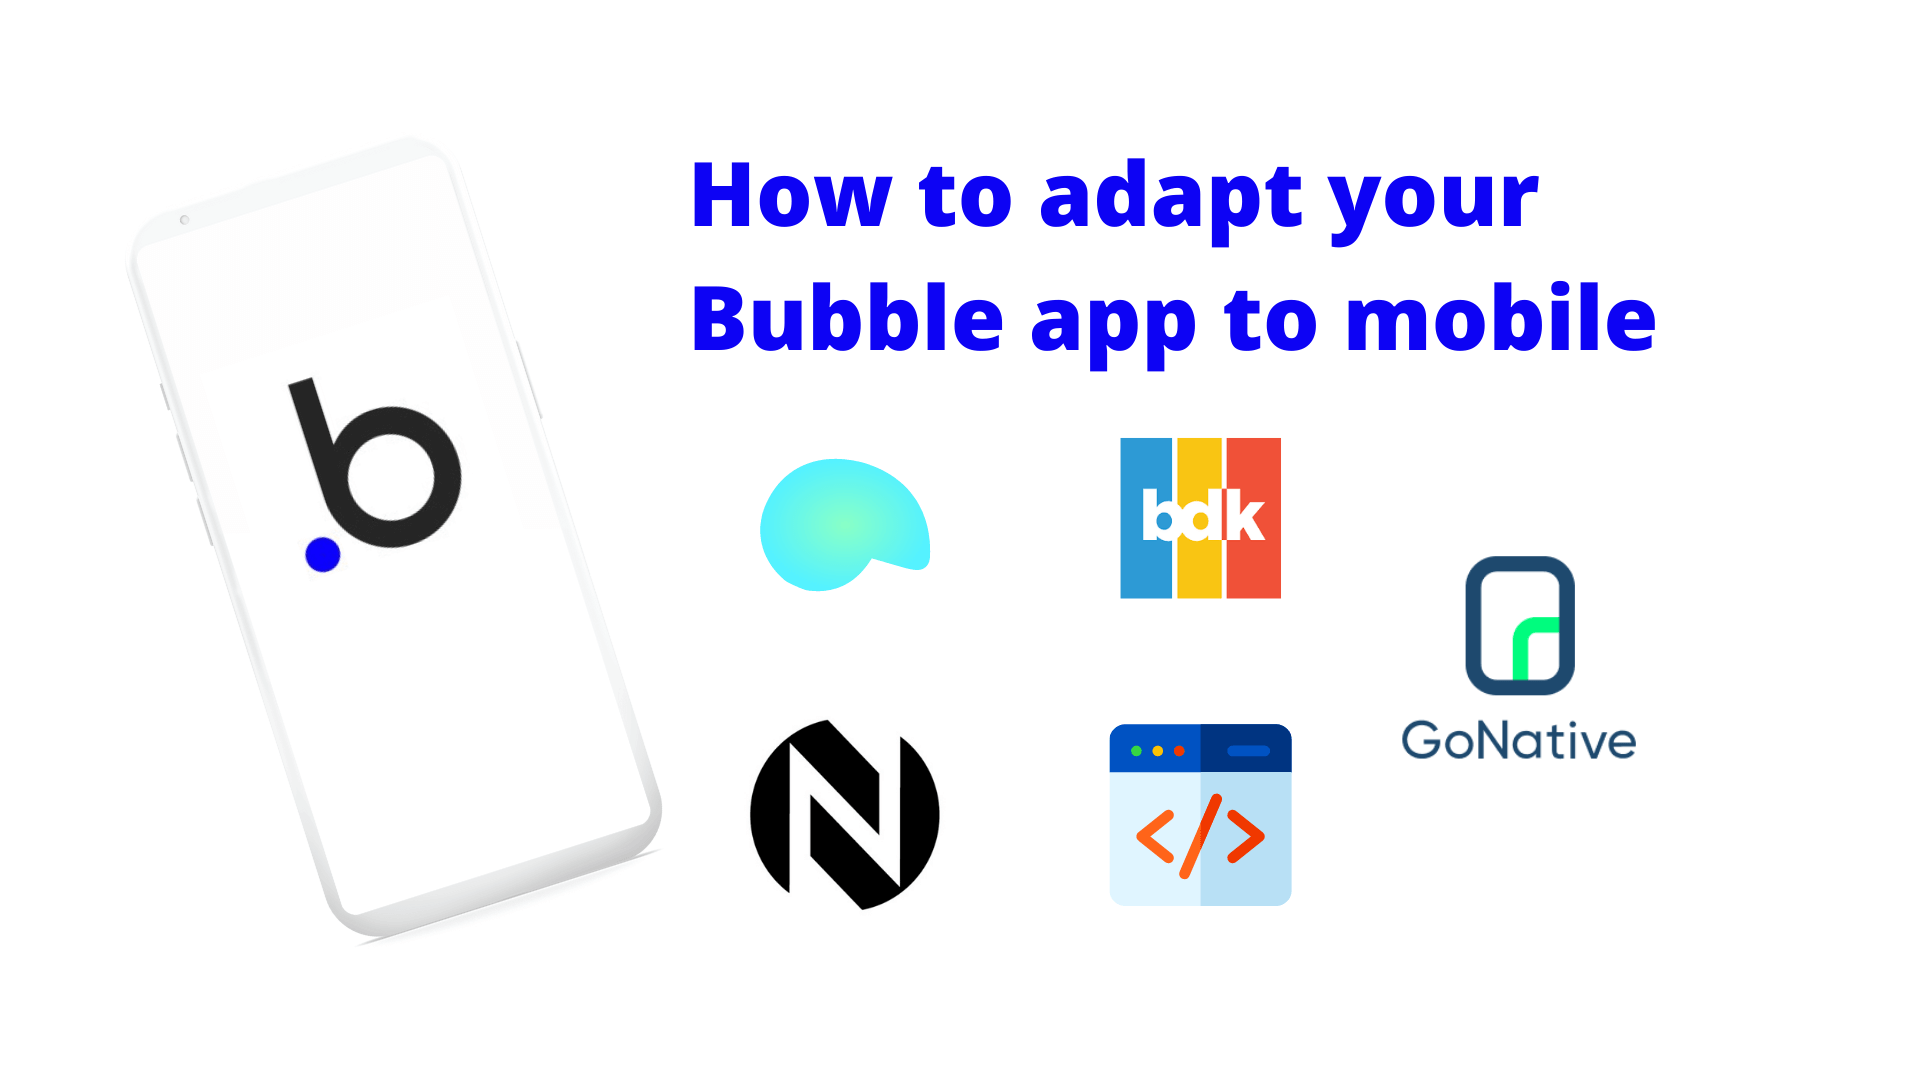 How to Adapt Your Bubble App to Mobile